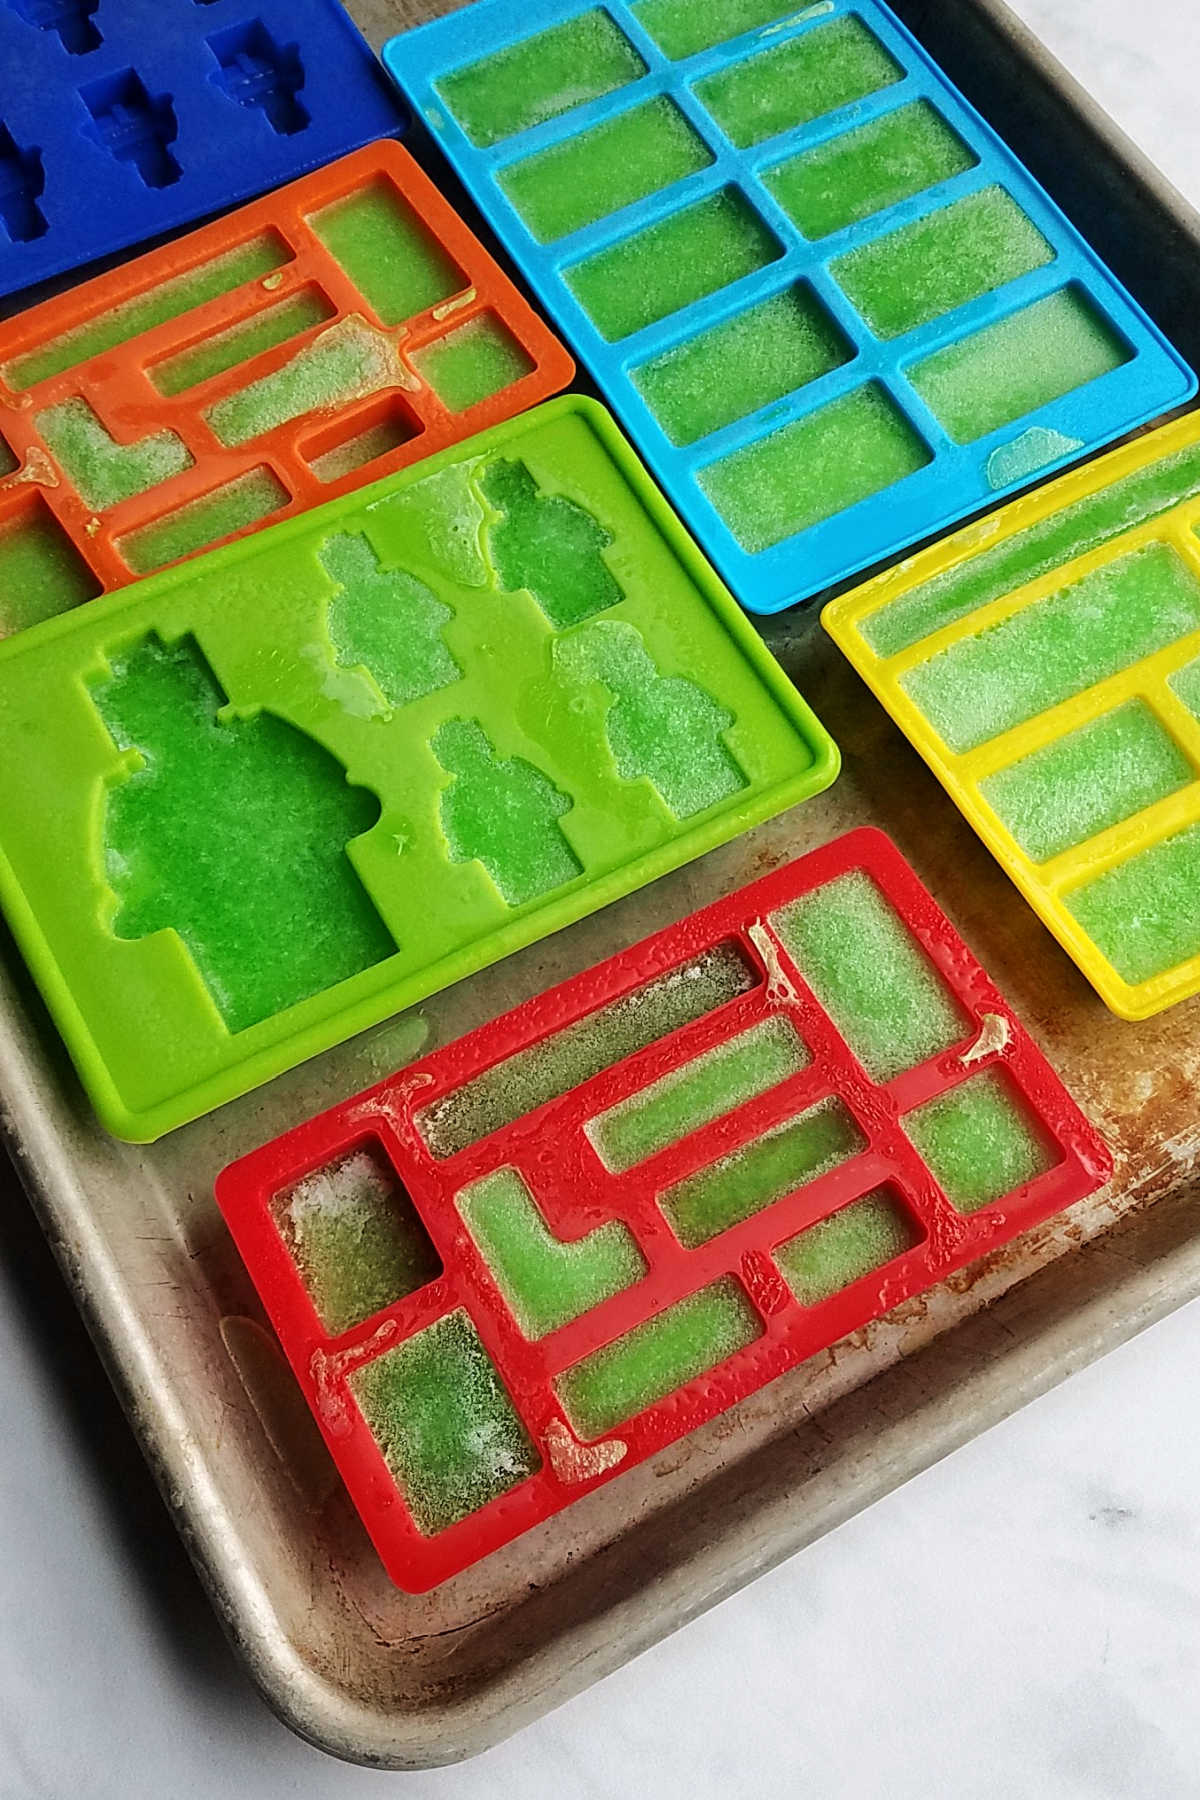 Silicone molds in lego shapes with jello inside.